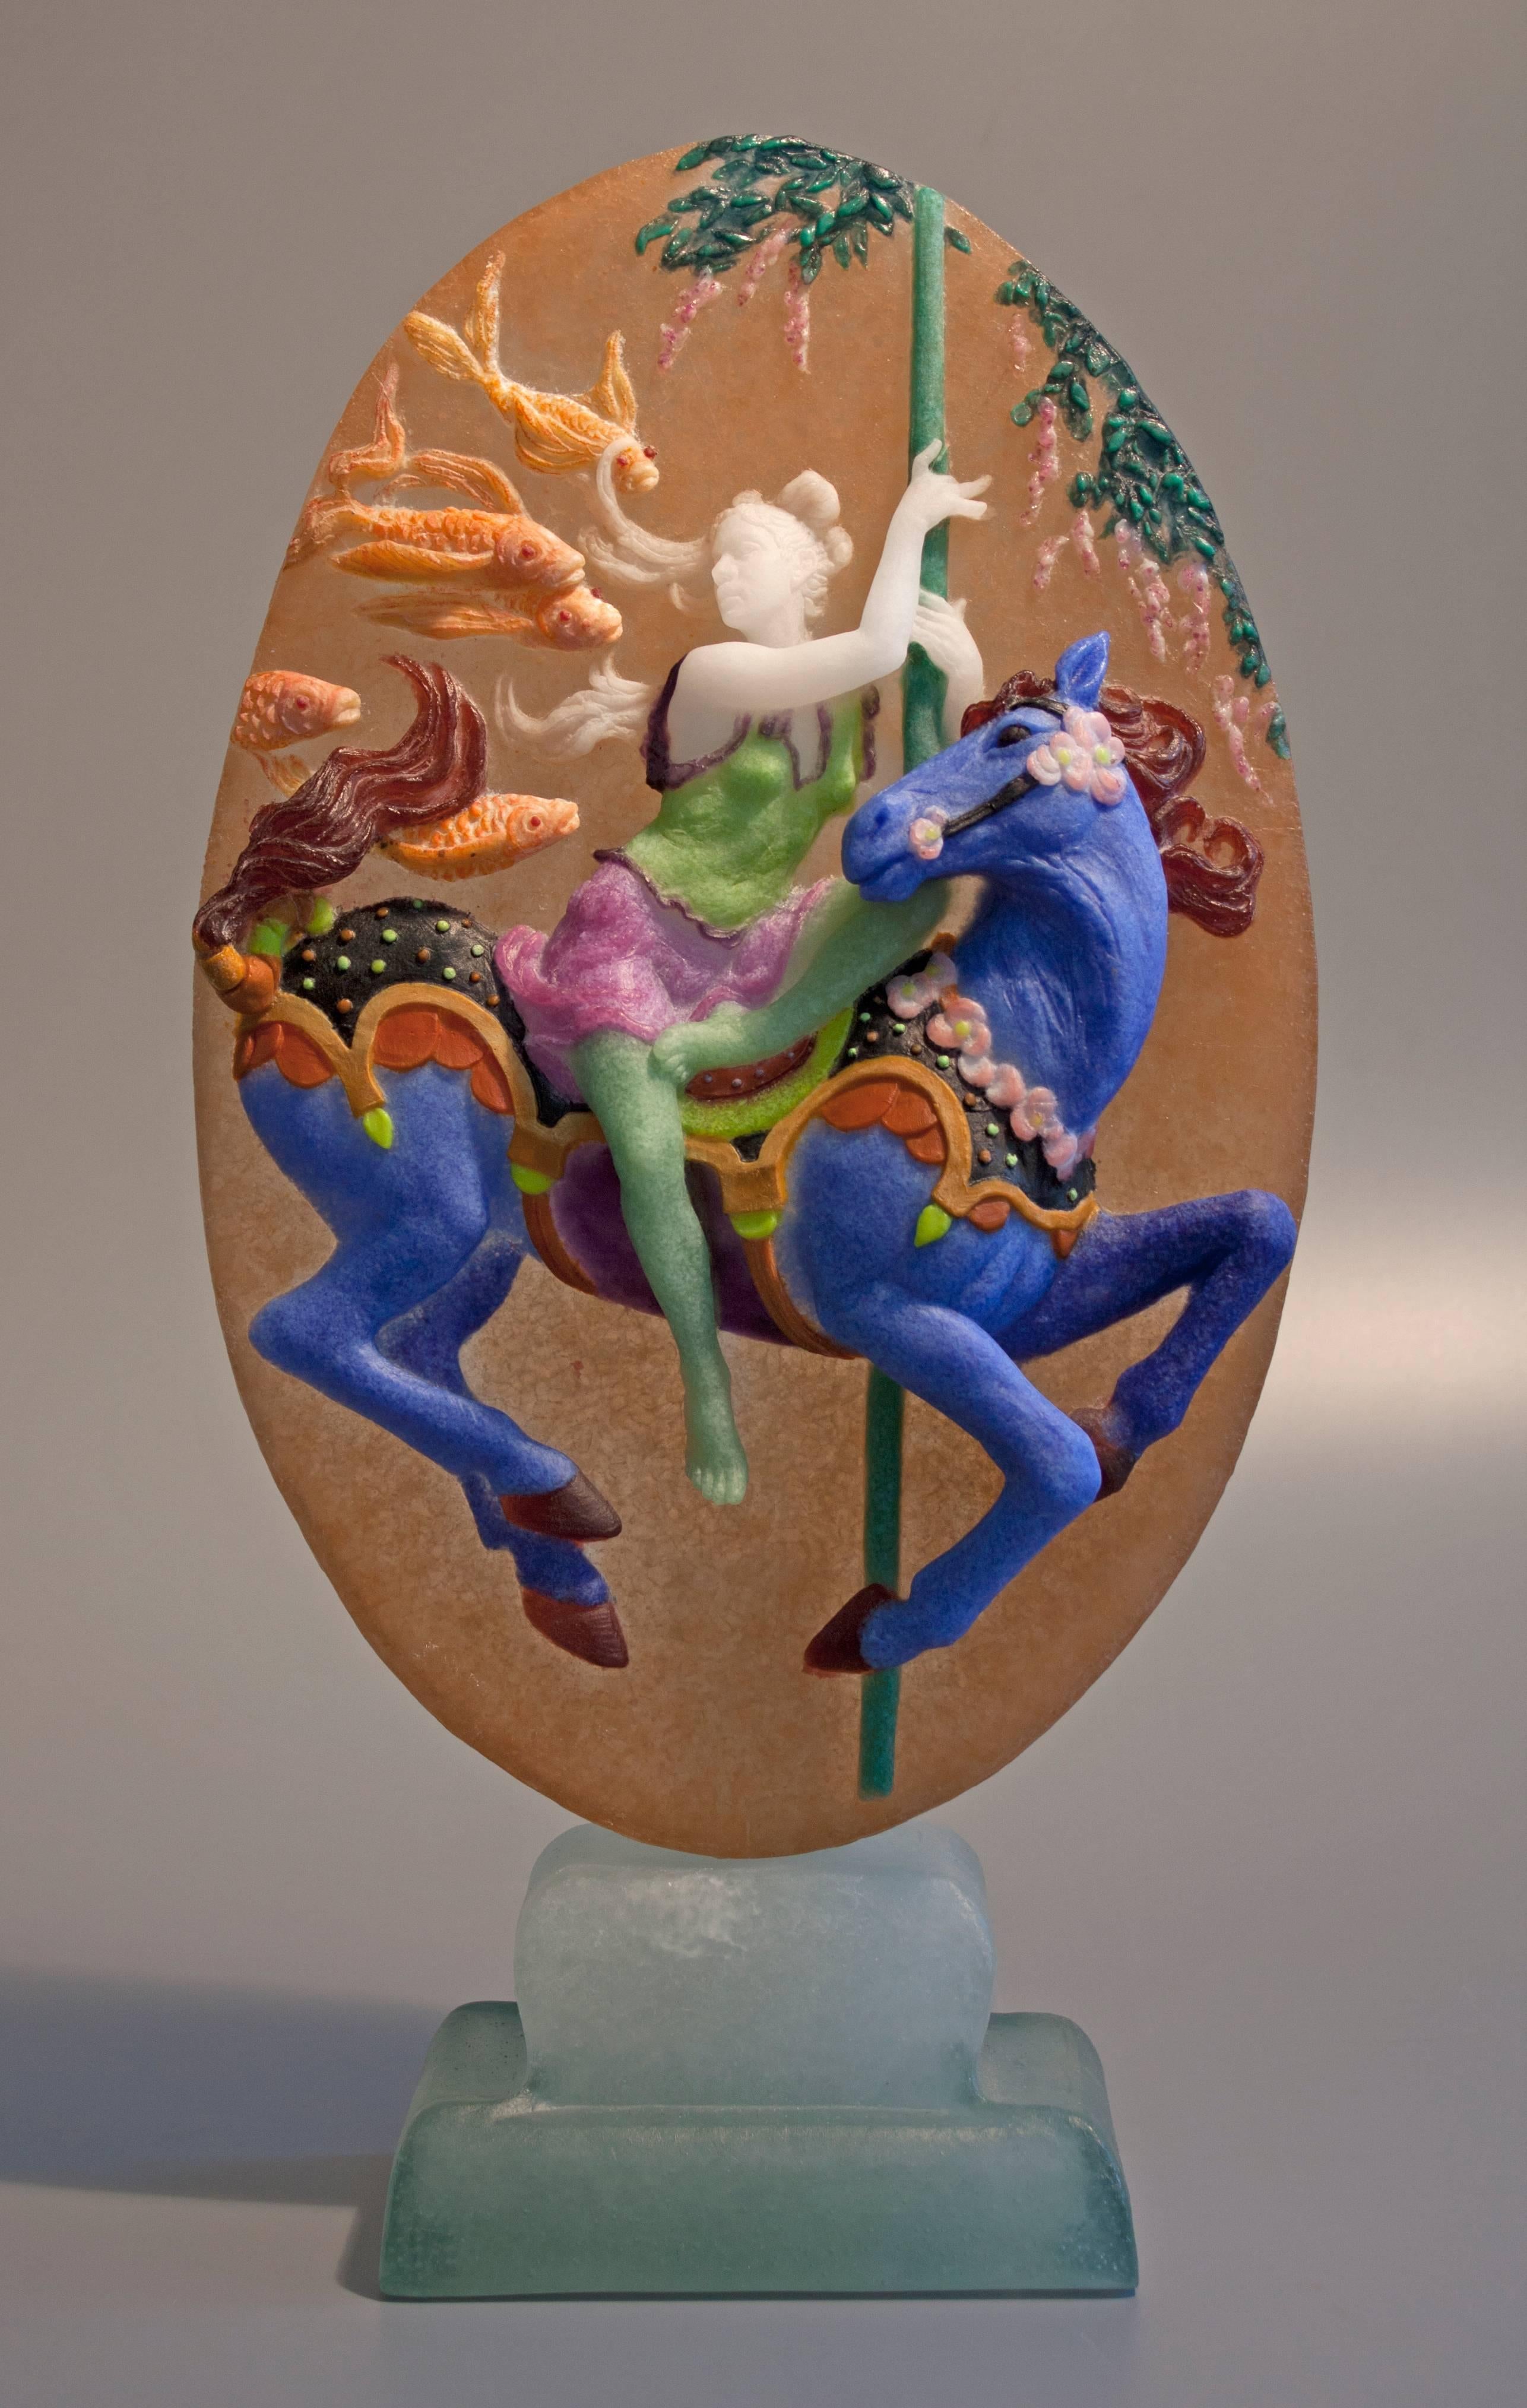 Wendy Saxon Brown Figurative Sculpture - Dream of the Carousel Horse and Flying Fish